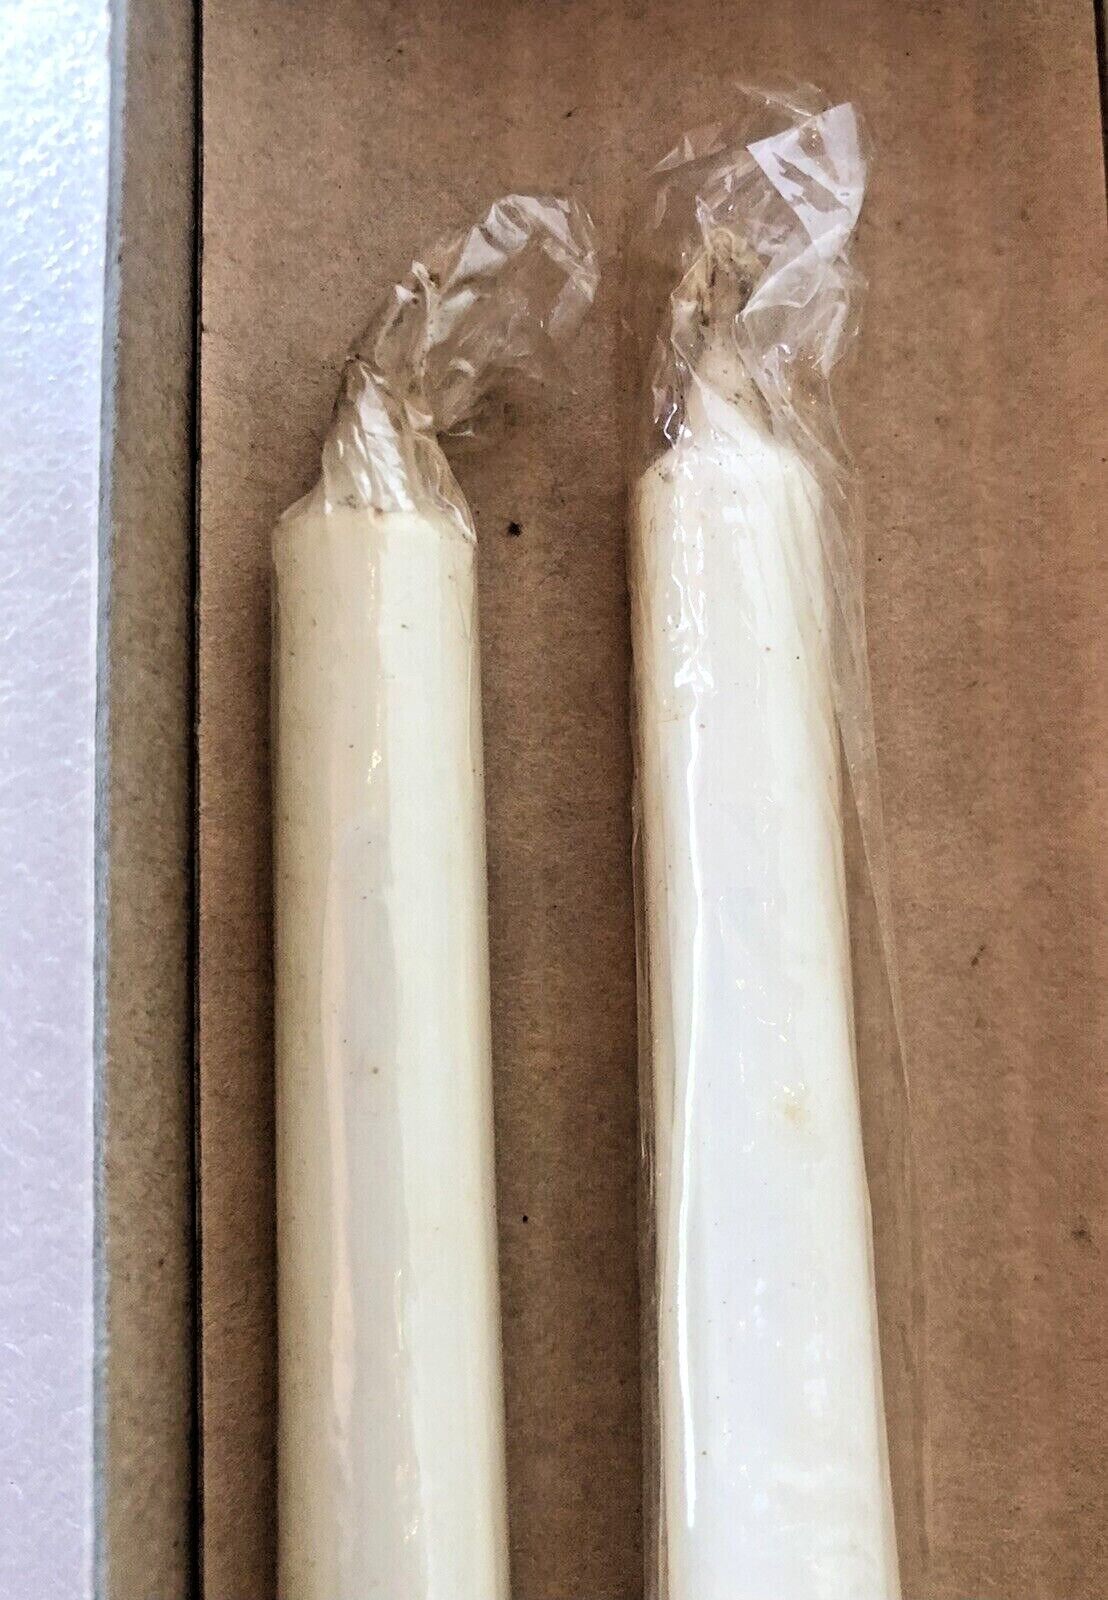 Vtg Extra Long White Taper Candles 23.5” Almost 2 Ft Original Box Will & Baumer